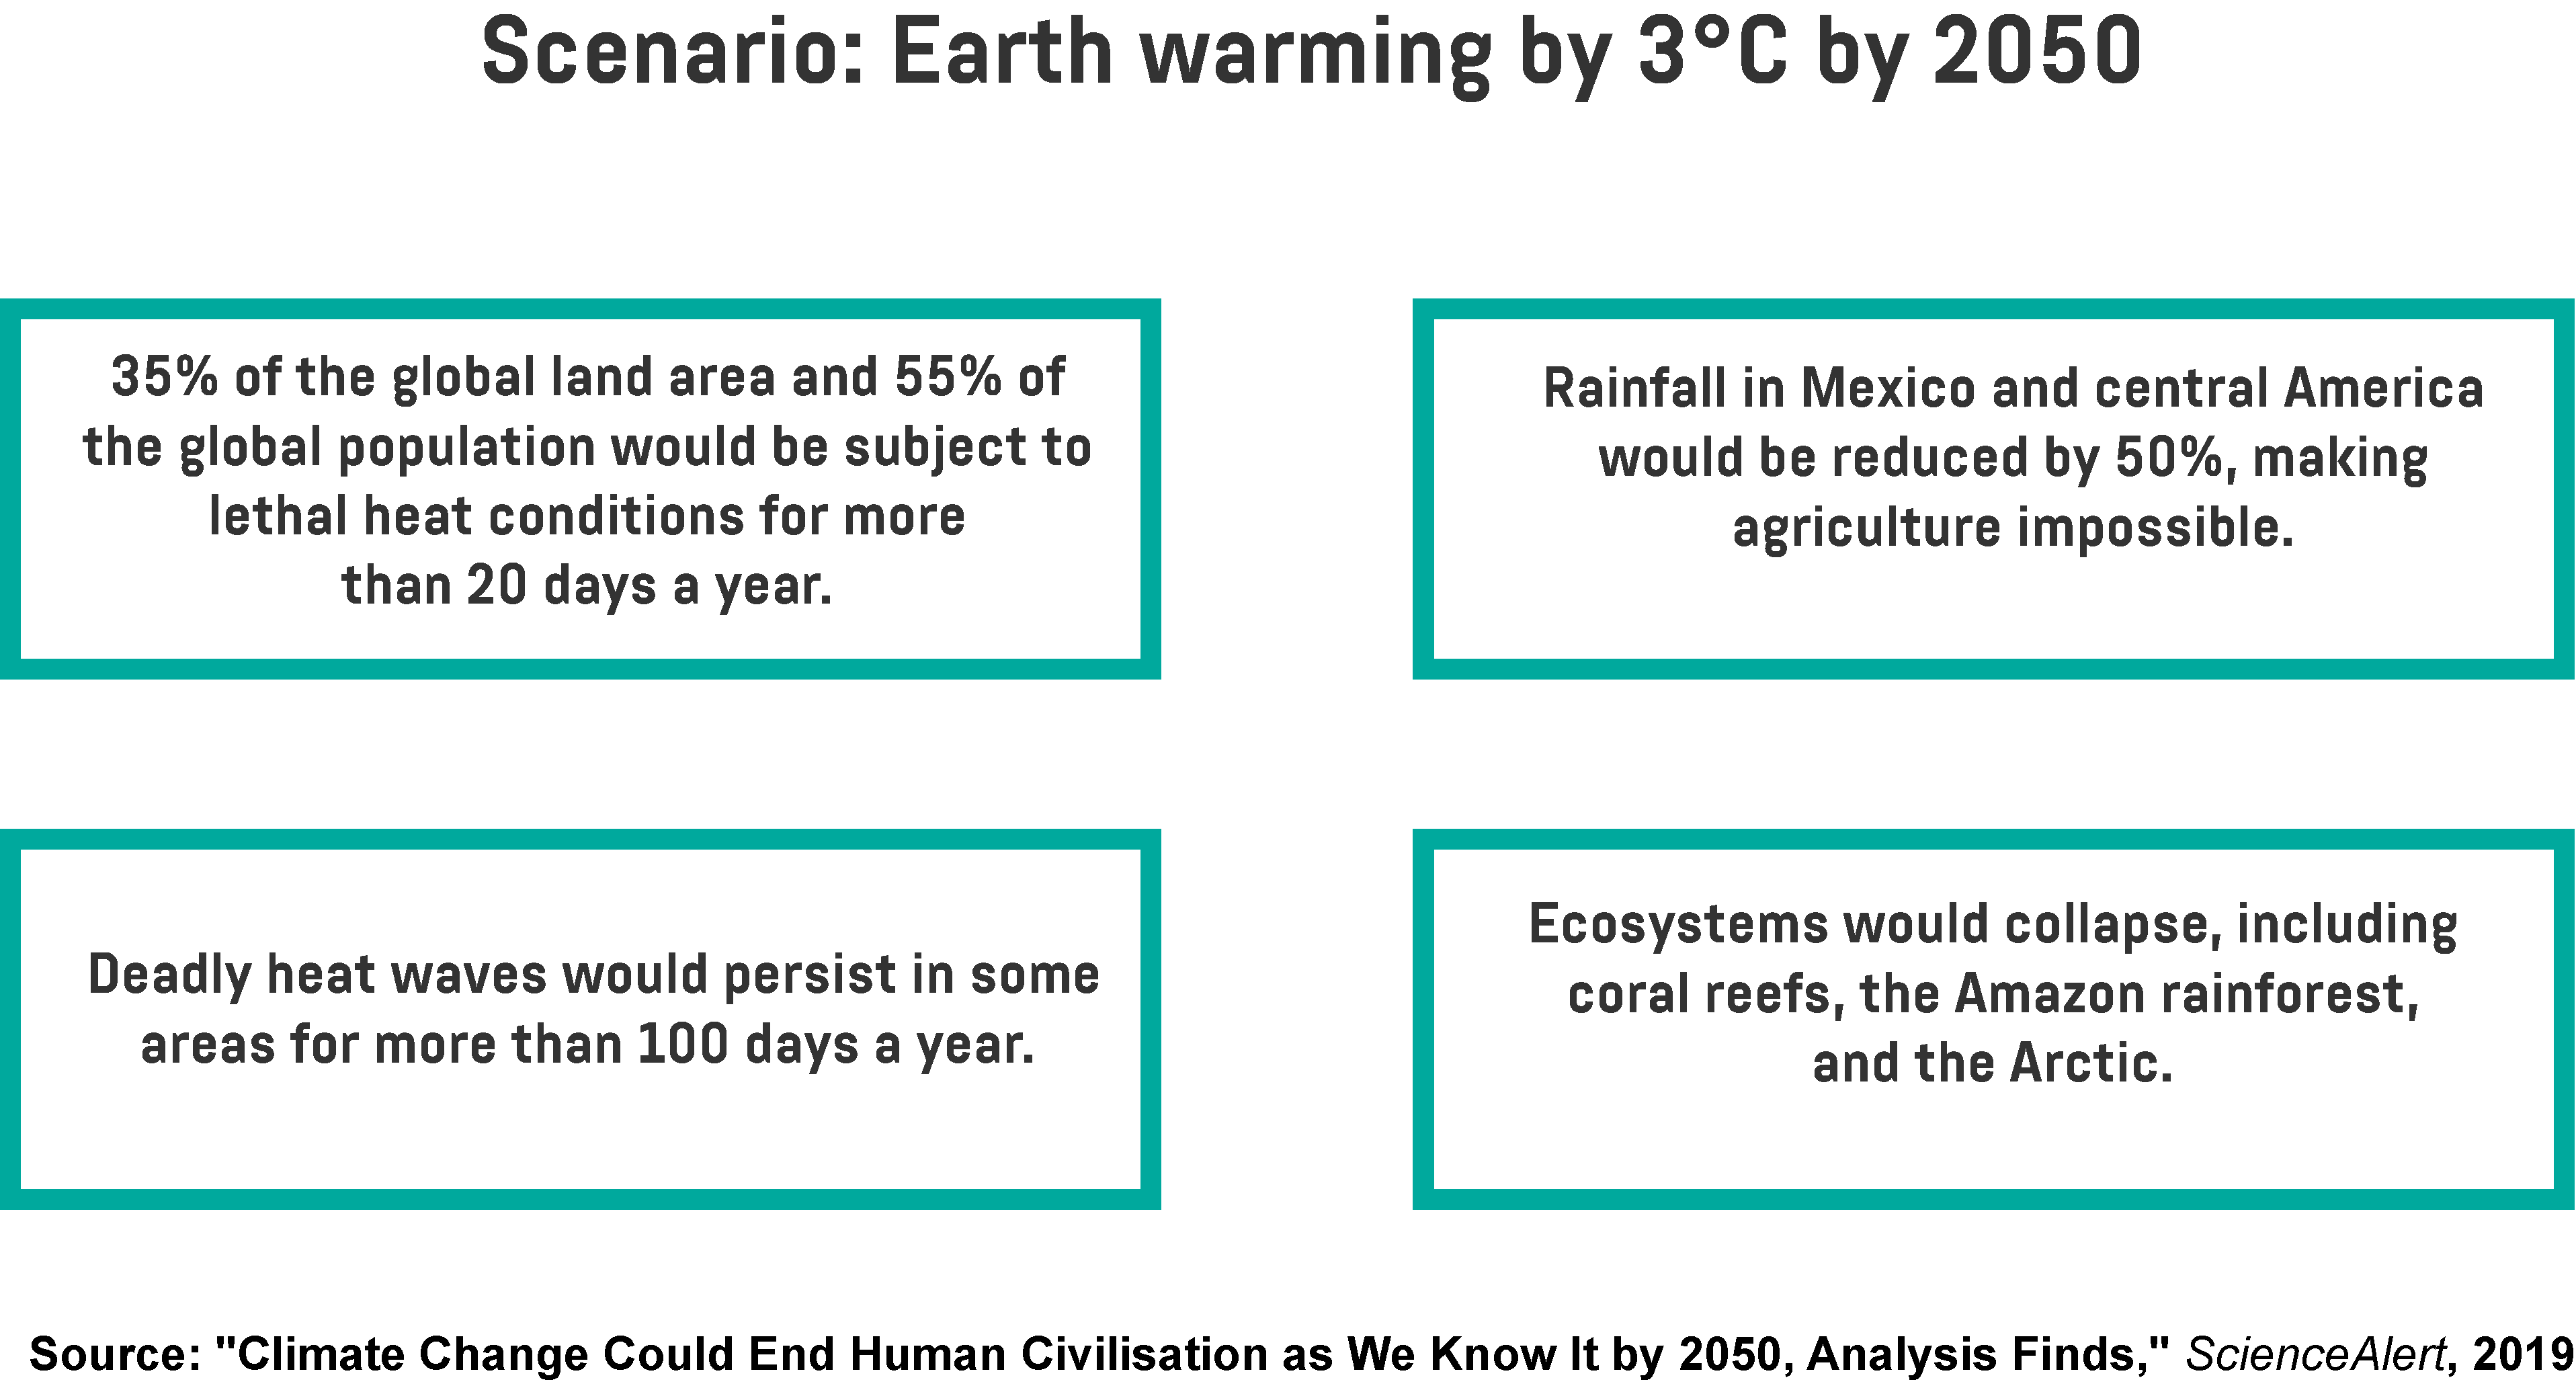  An infographic showing the predicted consequences of an additional 3 degrees Celsius of global warming.